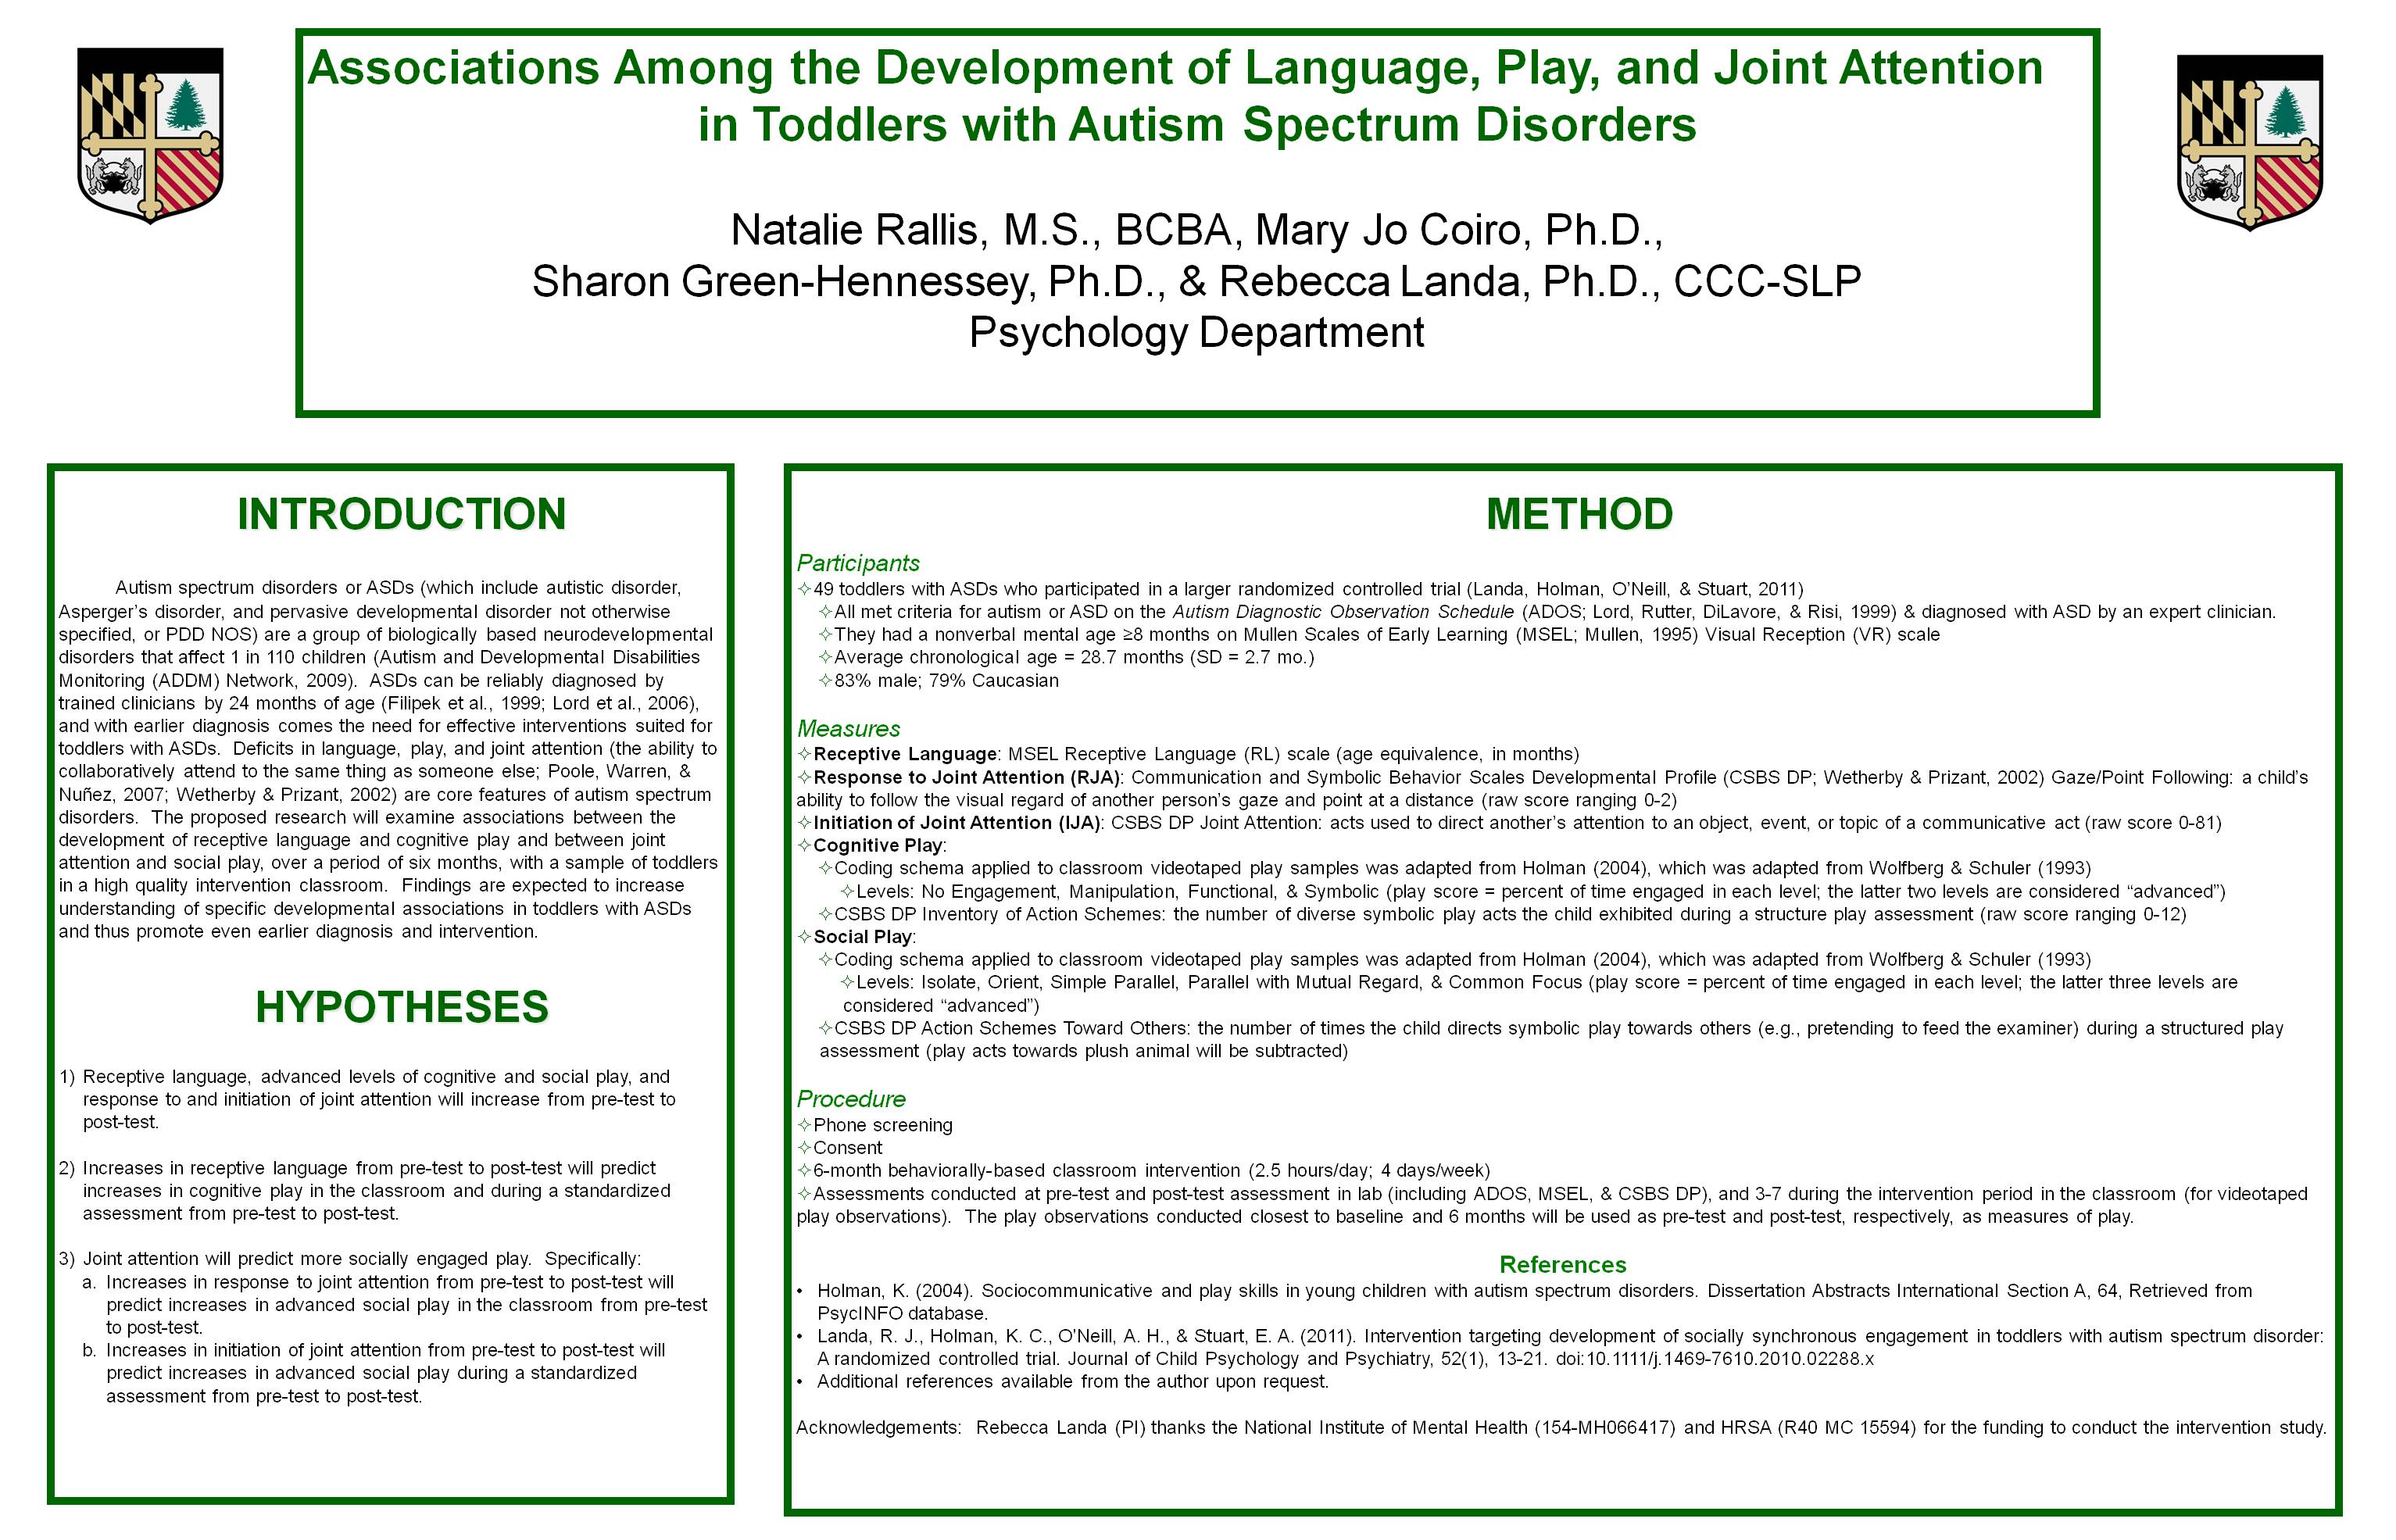 Poster image: Associations Among the Development of Language, Play, and Joint Attention in Toddlers with Autism Spectrum Disorders